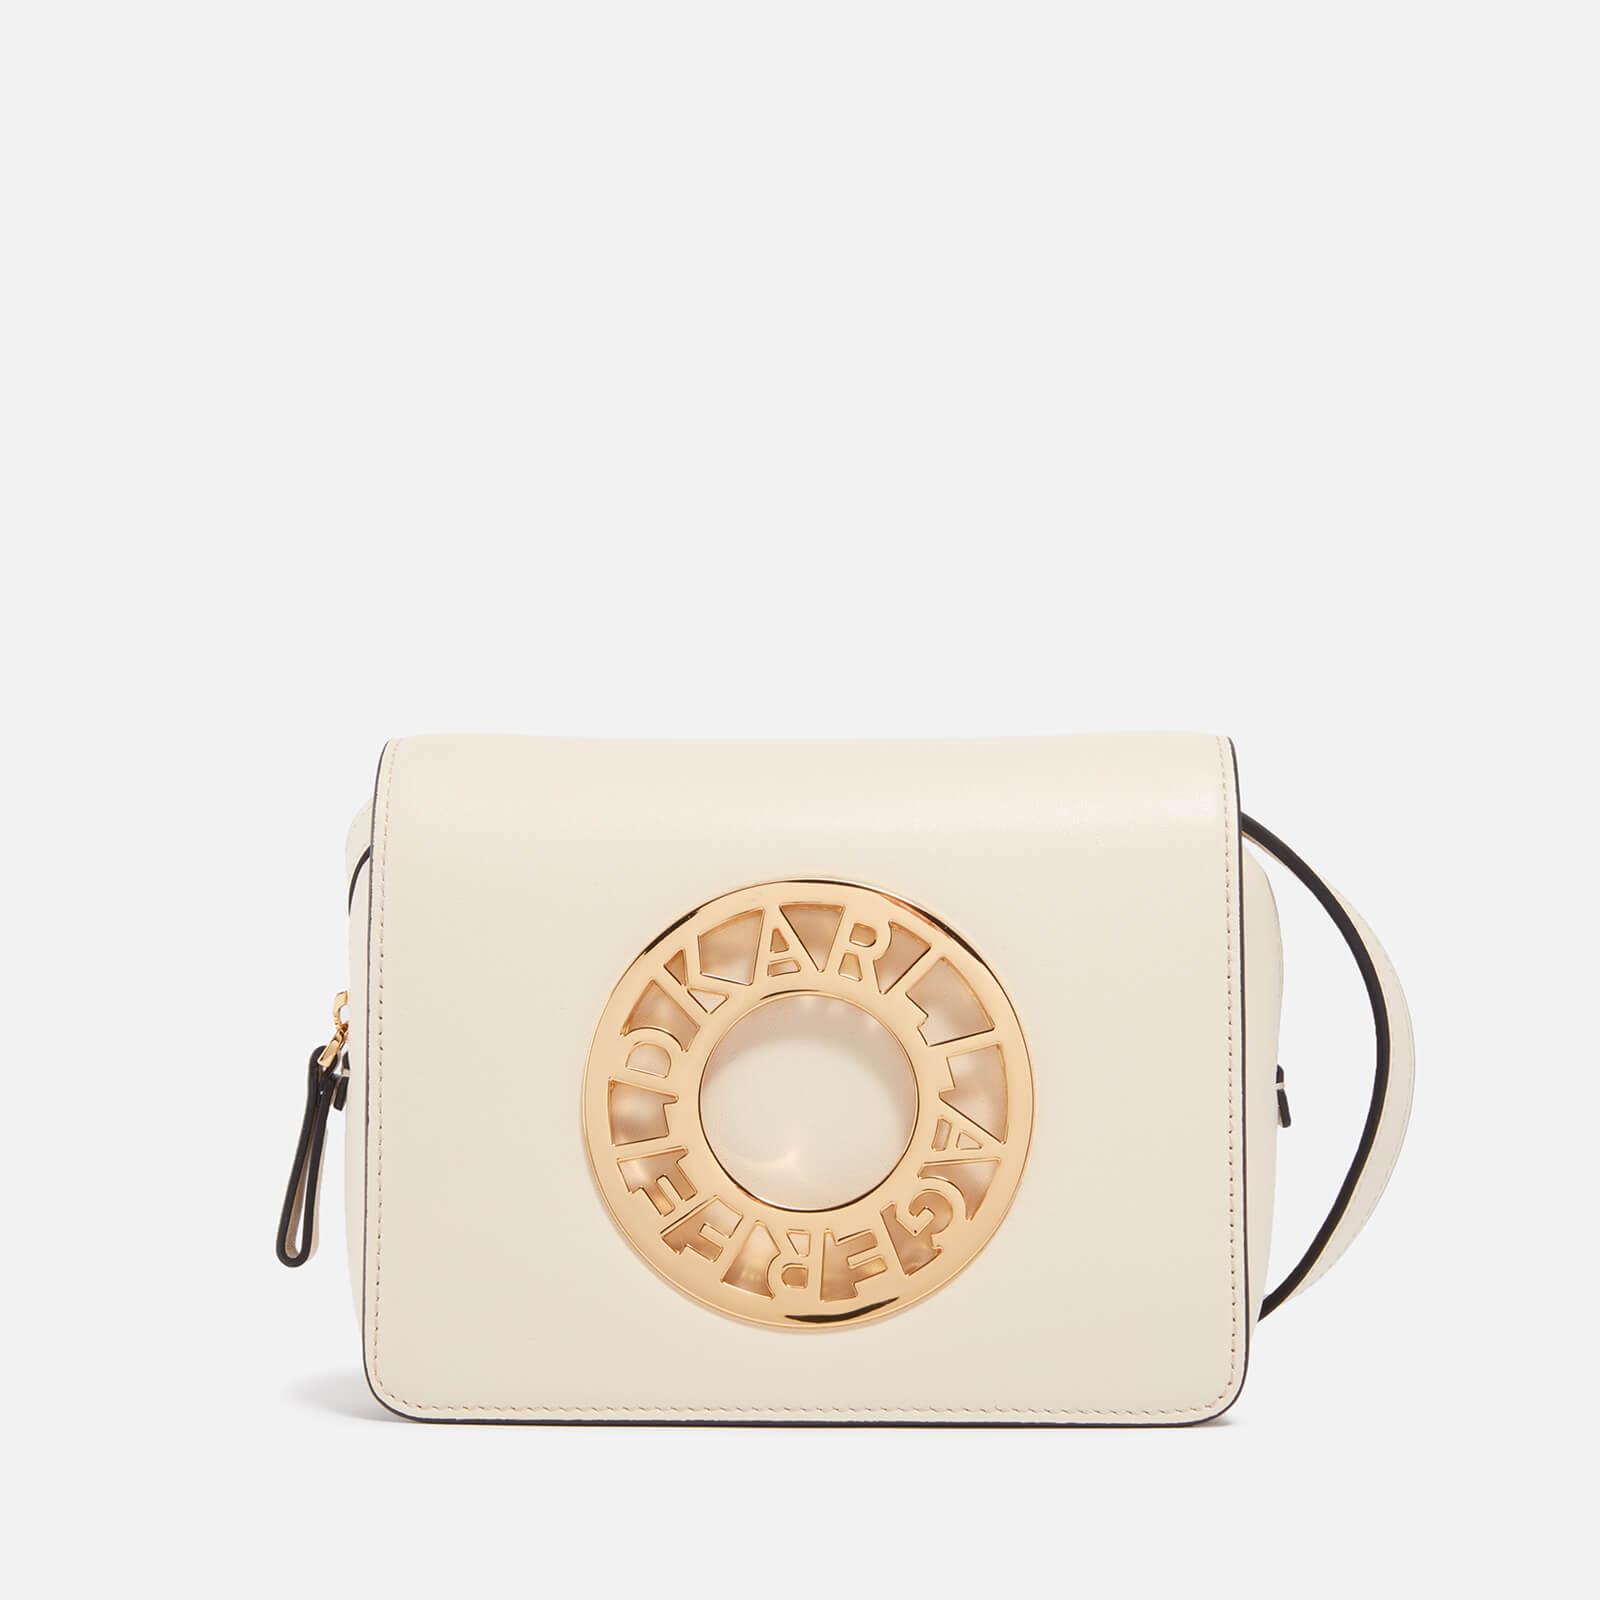 Karl Lagerfeld Disk Logo Leather Crossbody Bag in Natural | Lyst